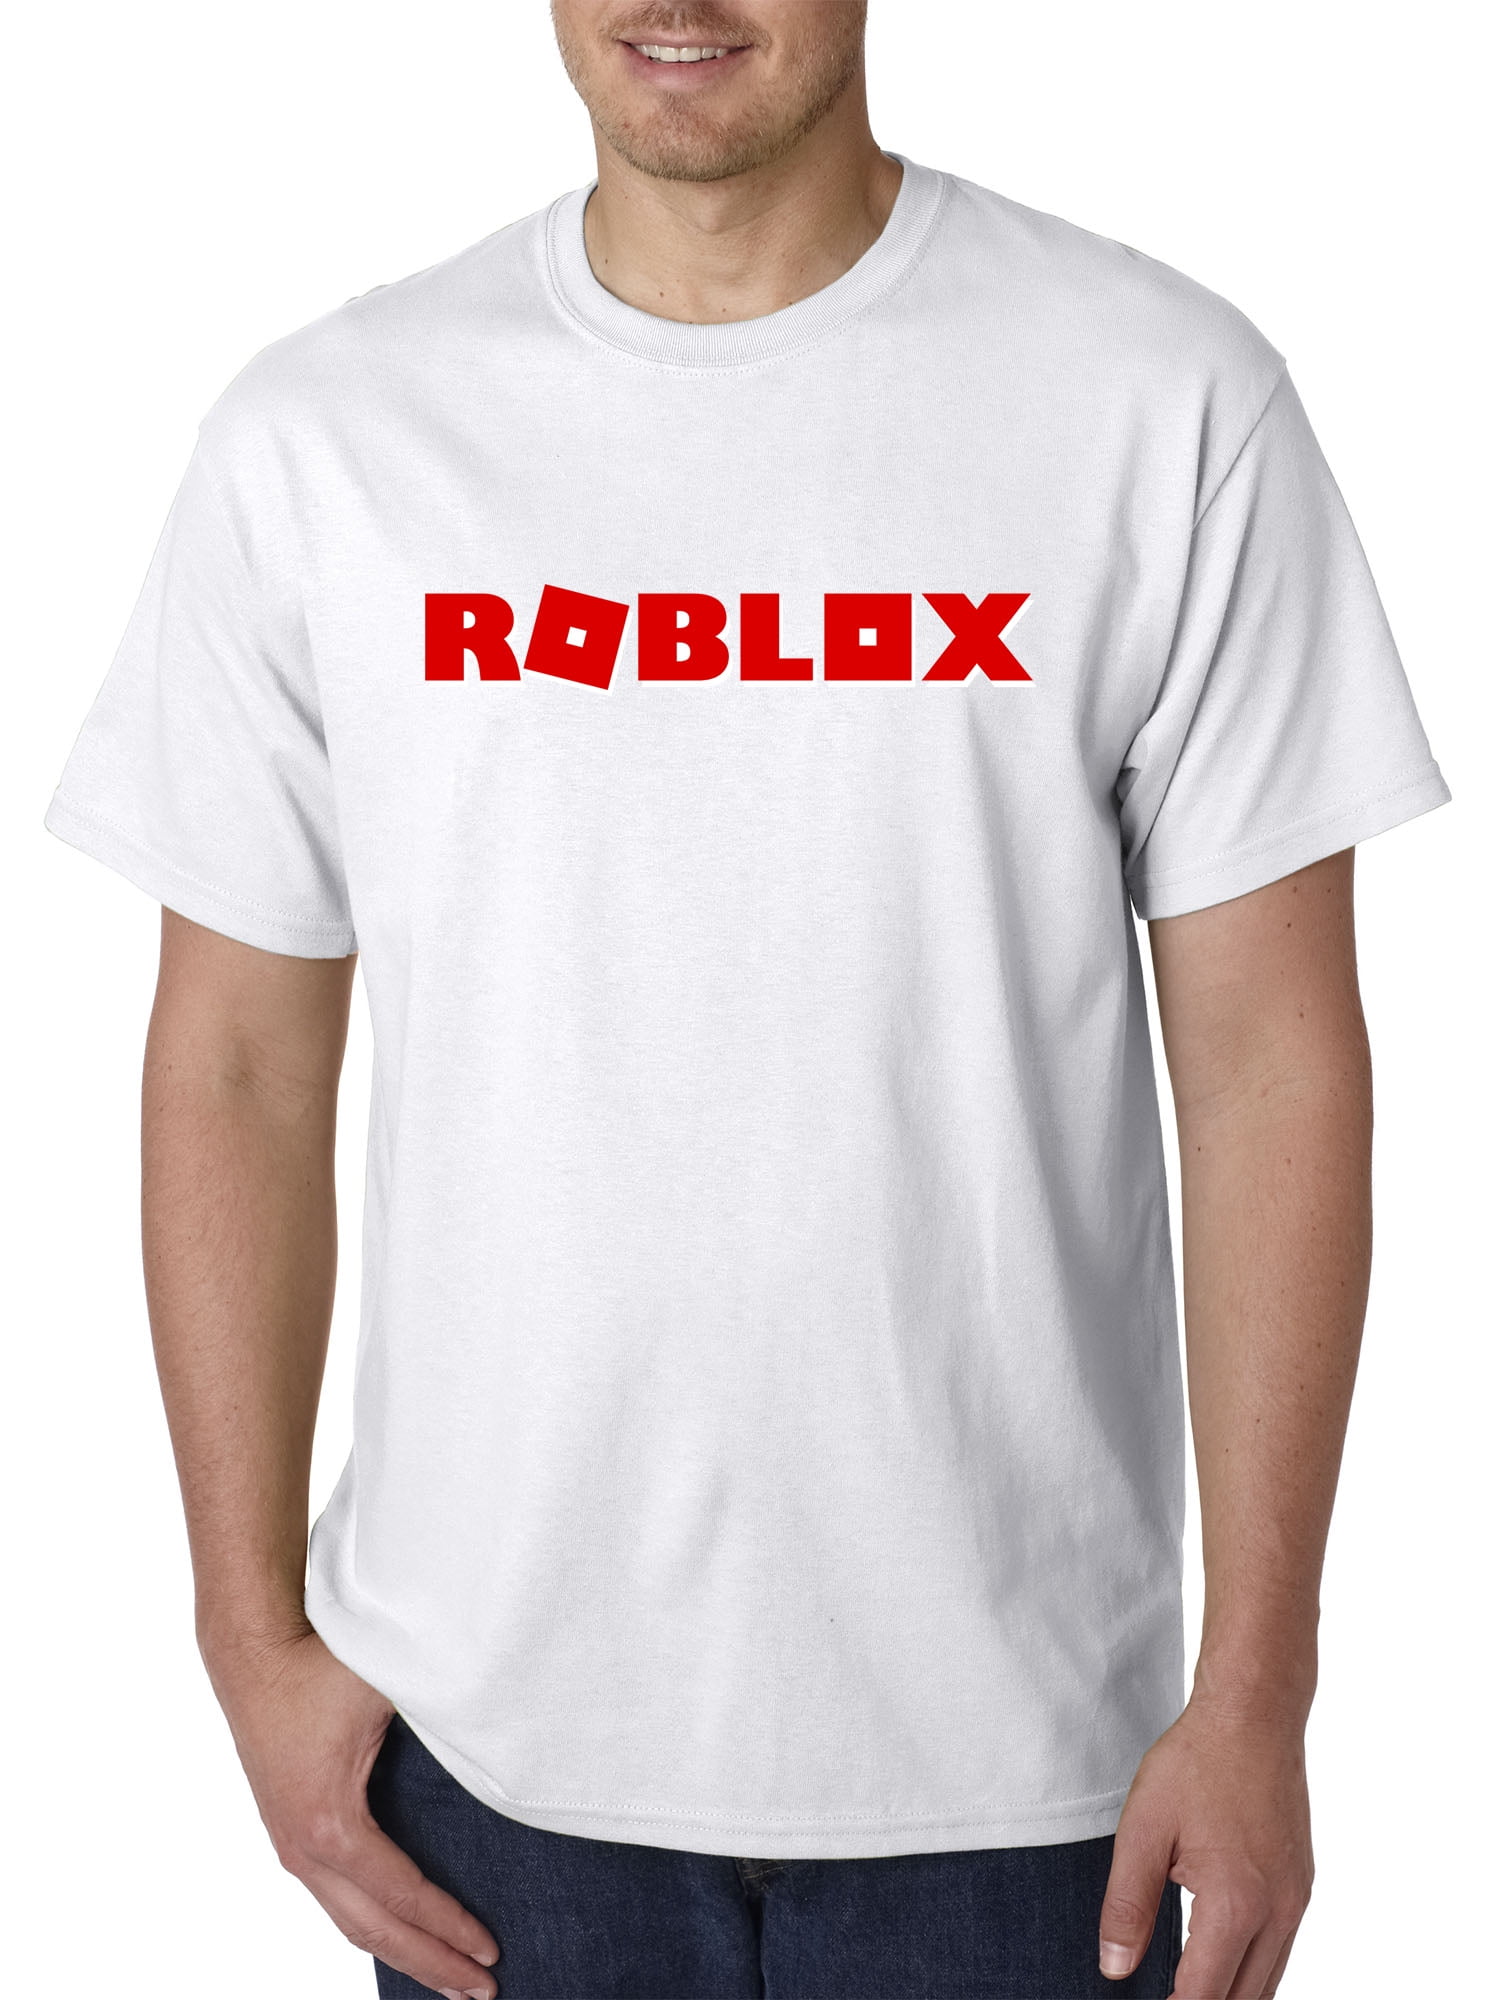 New Way New Way 922 Unisex T Shirt Roblox Logo Game Filled Large White Walmart Com - roblox player style shirts t shirt unisex roblox player shirt style unisex shirts men shirt style